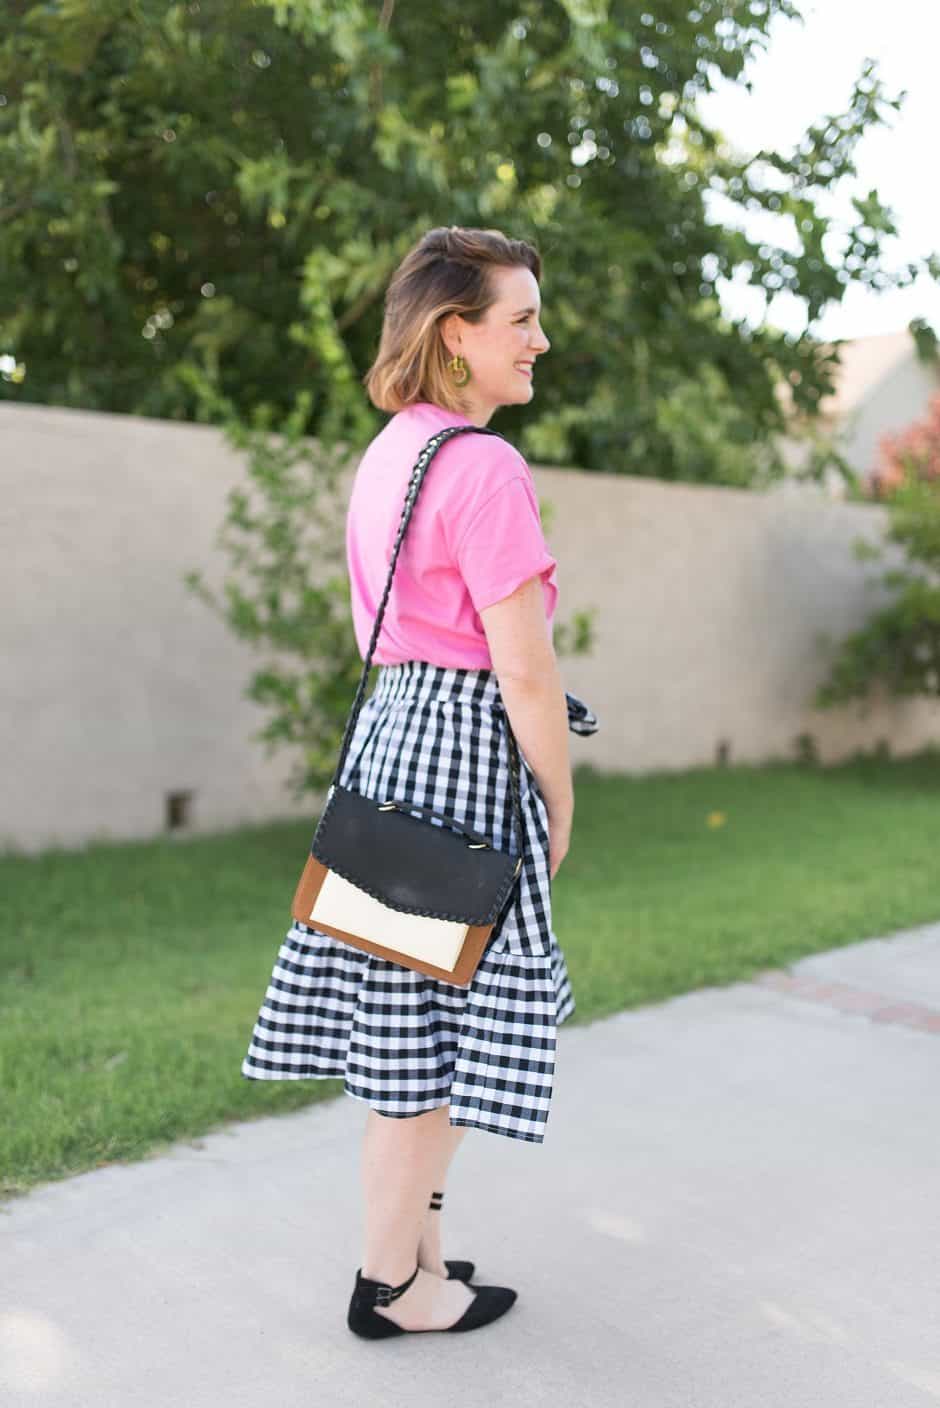 Gingham is still going strong as a trend in women's clothing and we're loving it! But it's not always easy to figure out what to wear with it. Read on for tips on how to style a gingham skirt and ensure you keep it looking grown up!